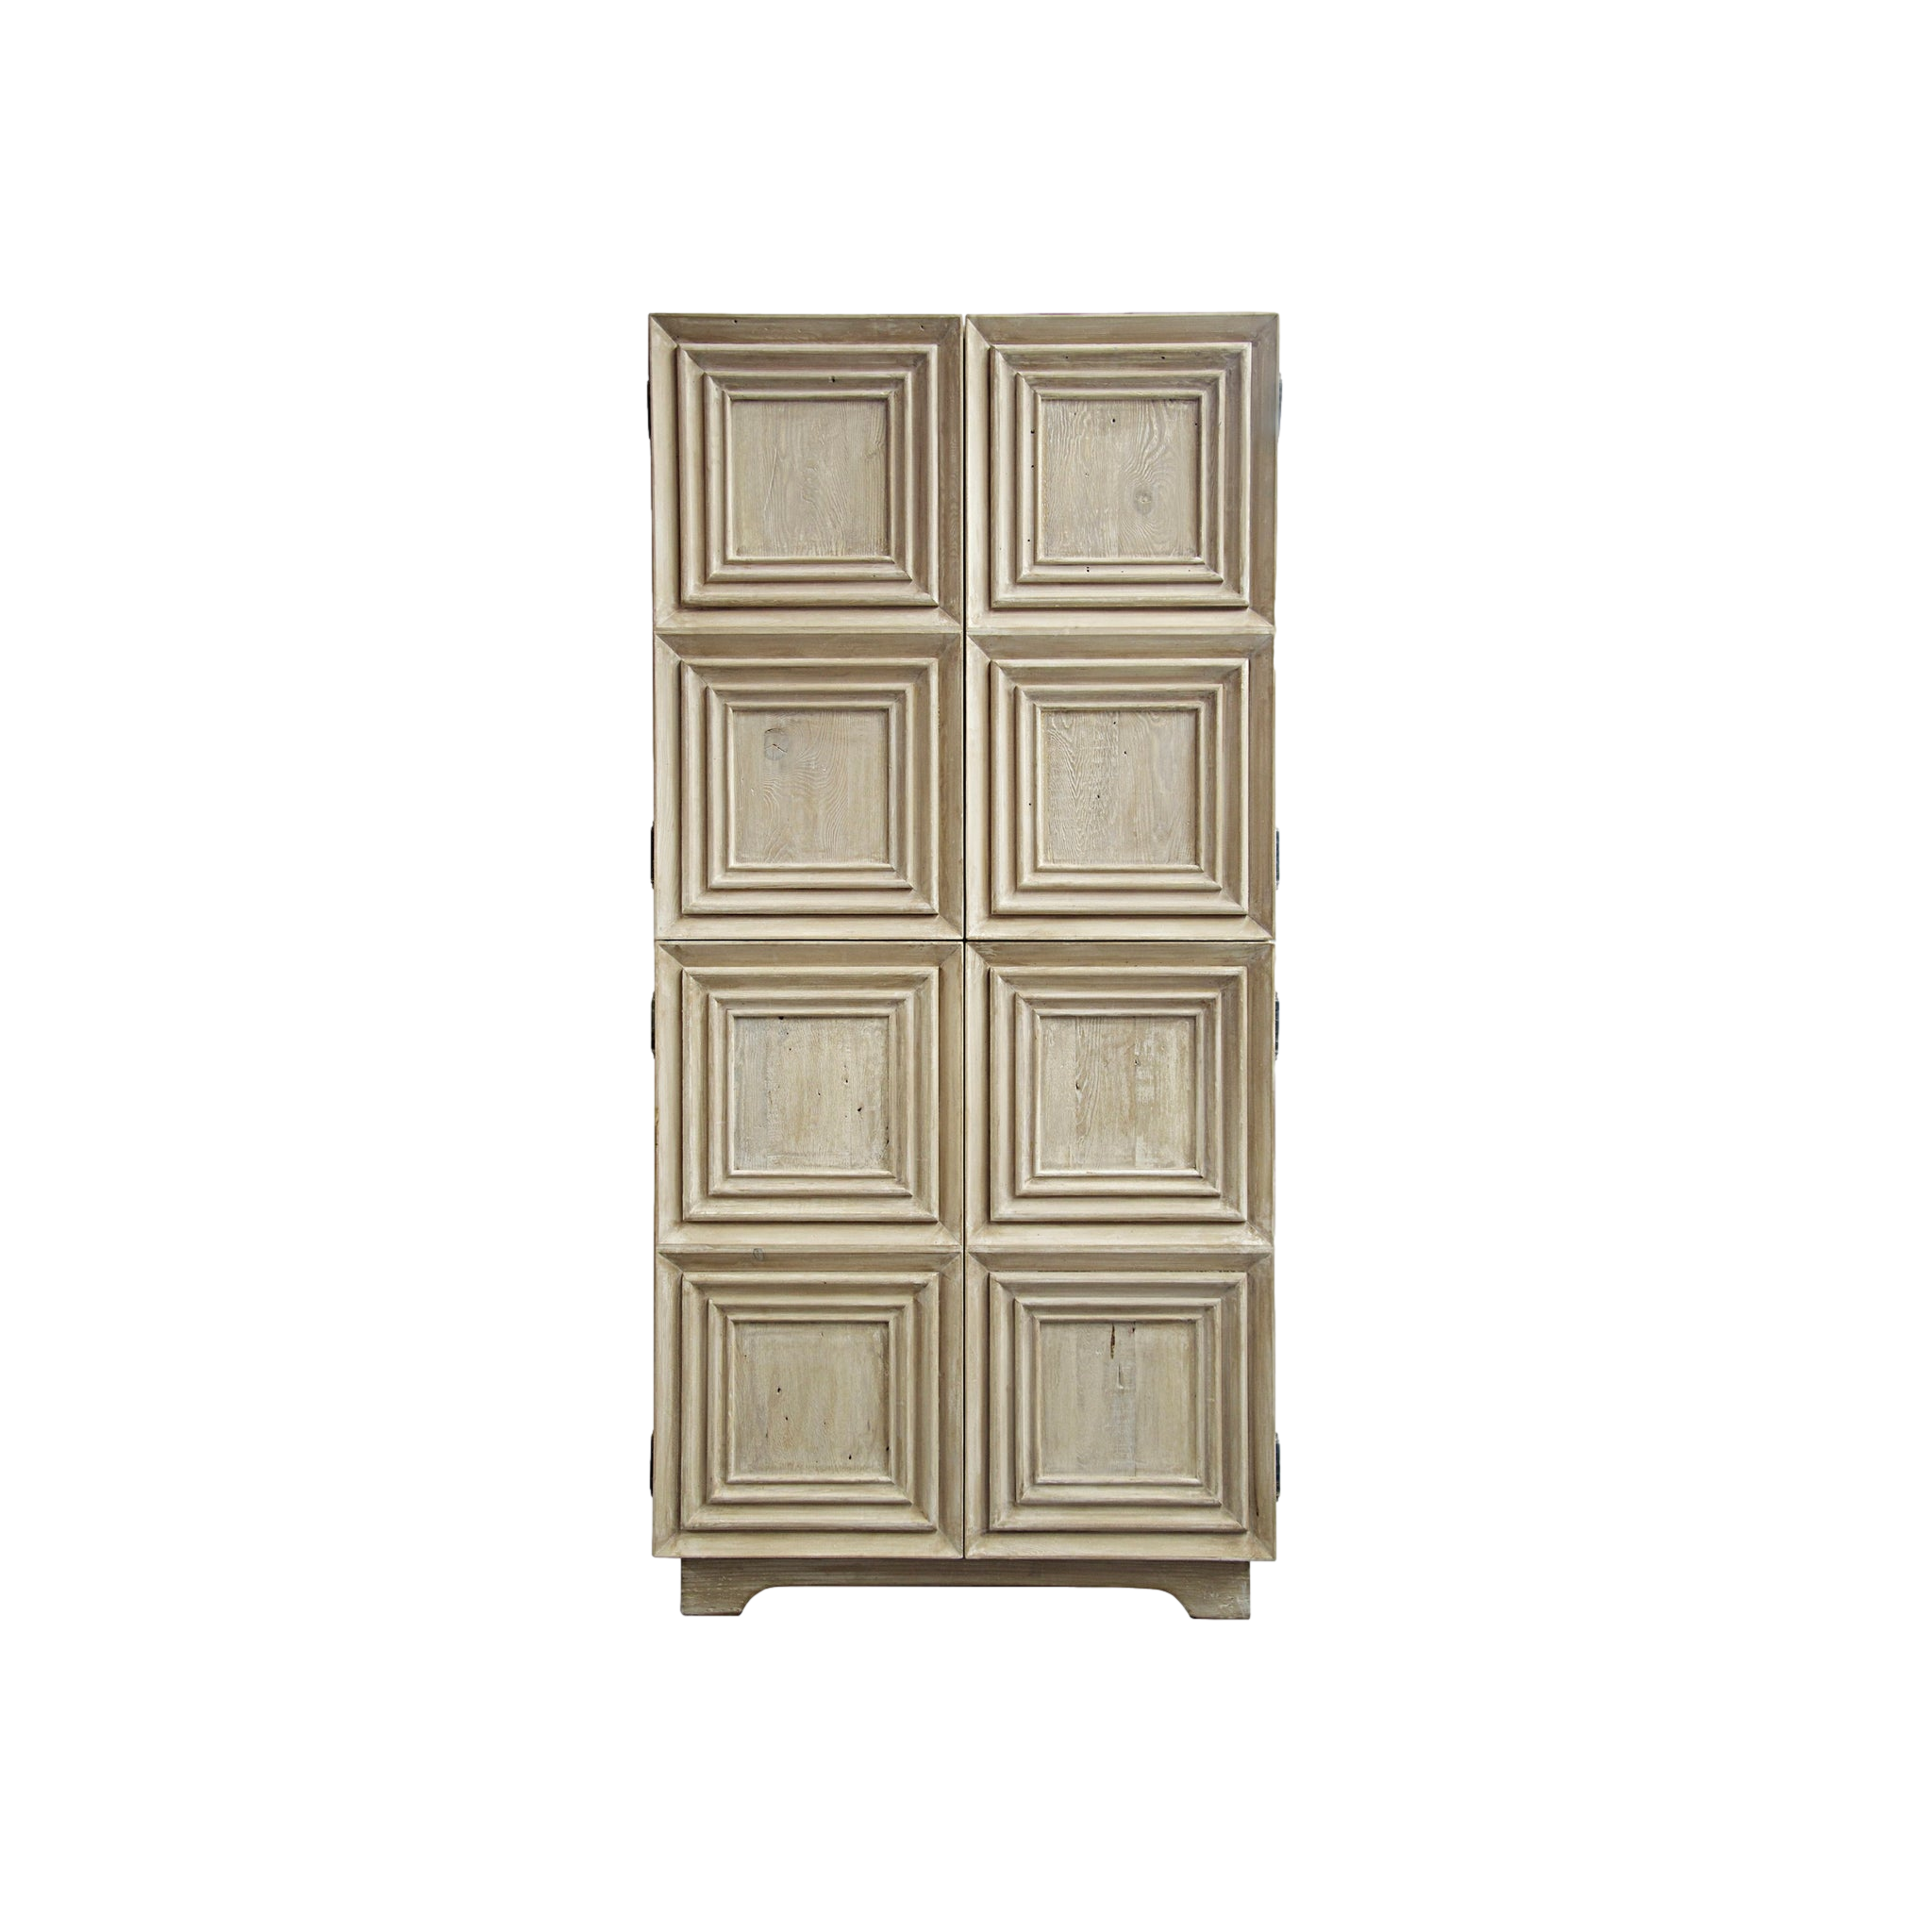 Hathaway Armoire